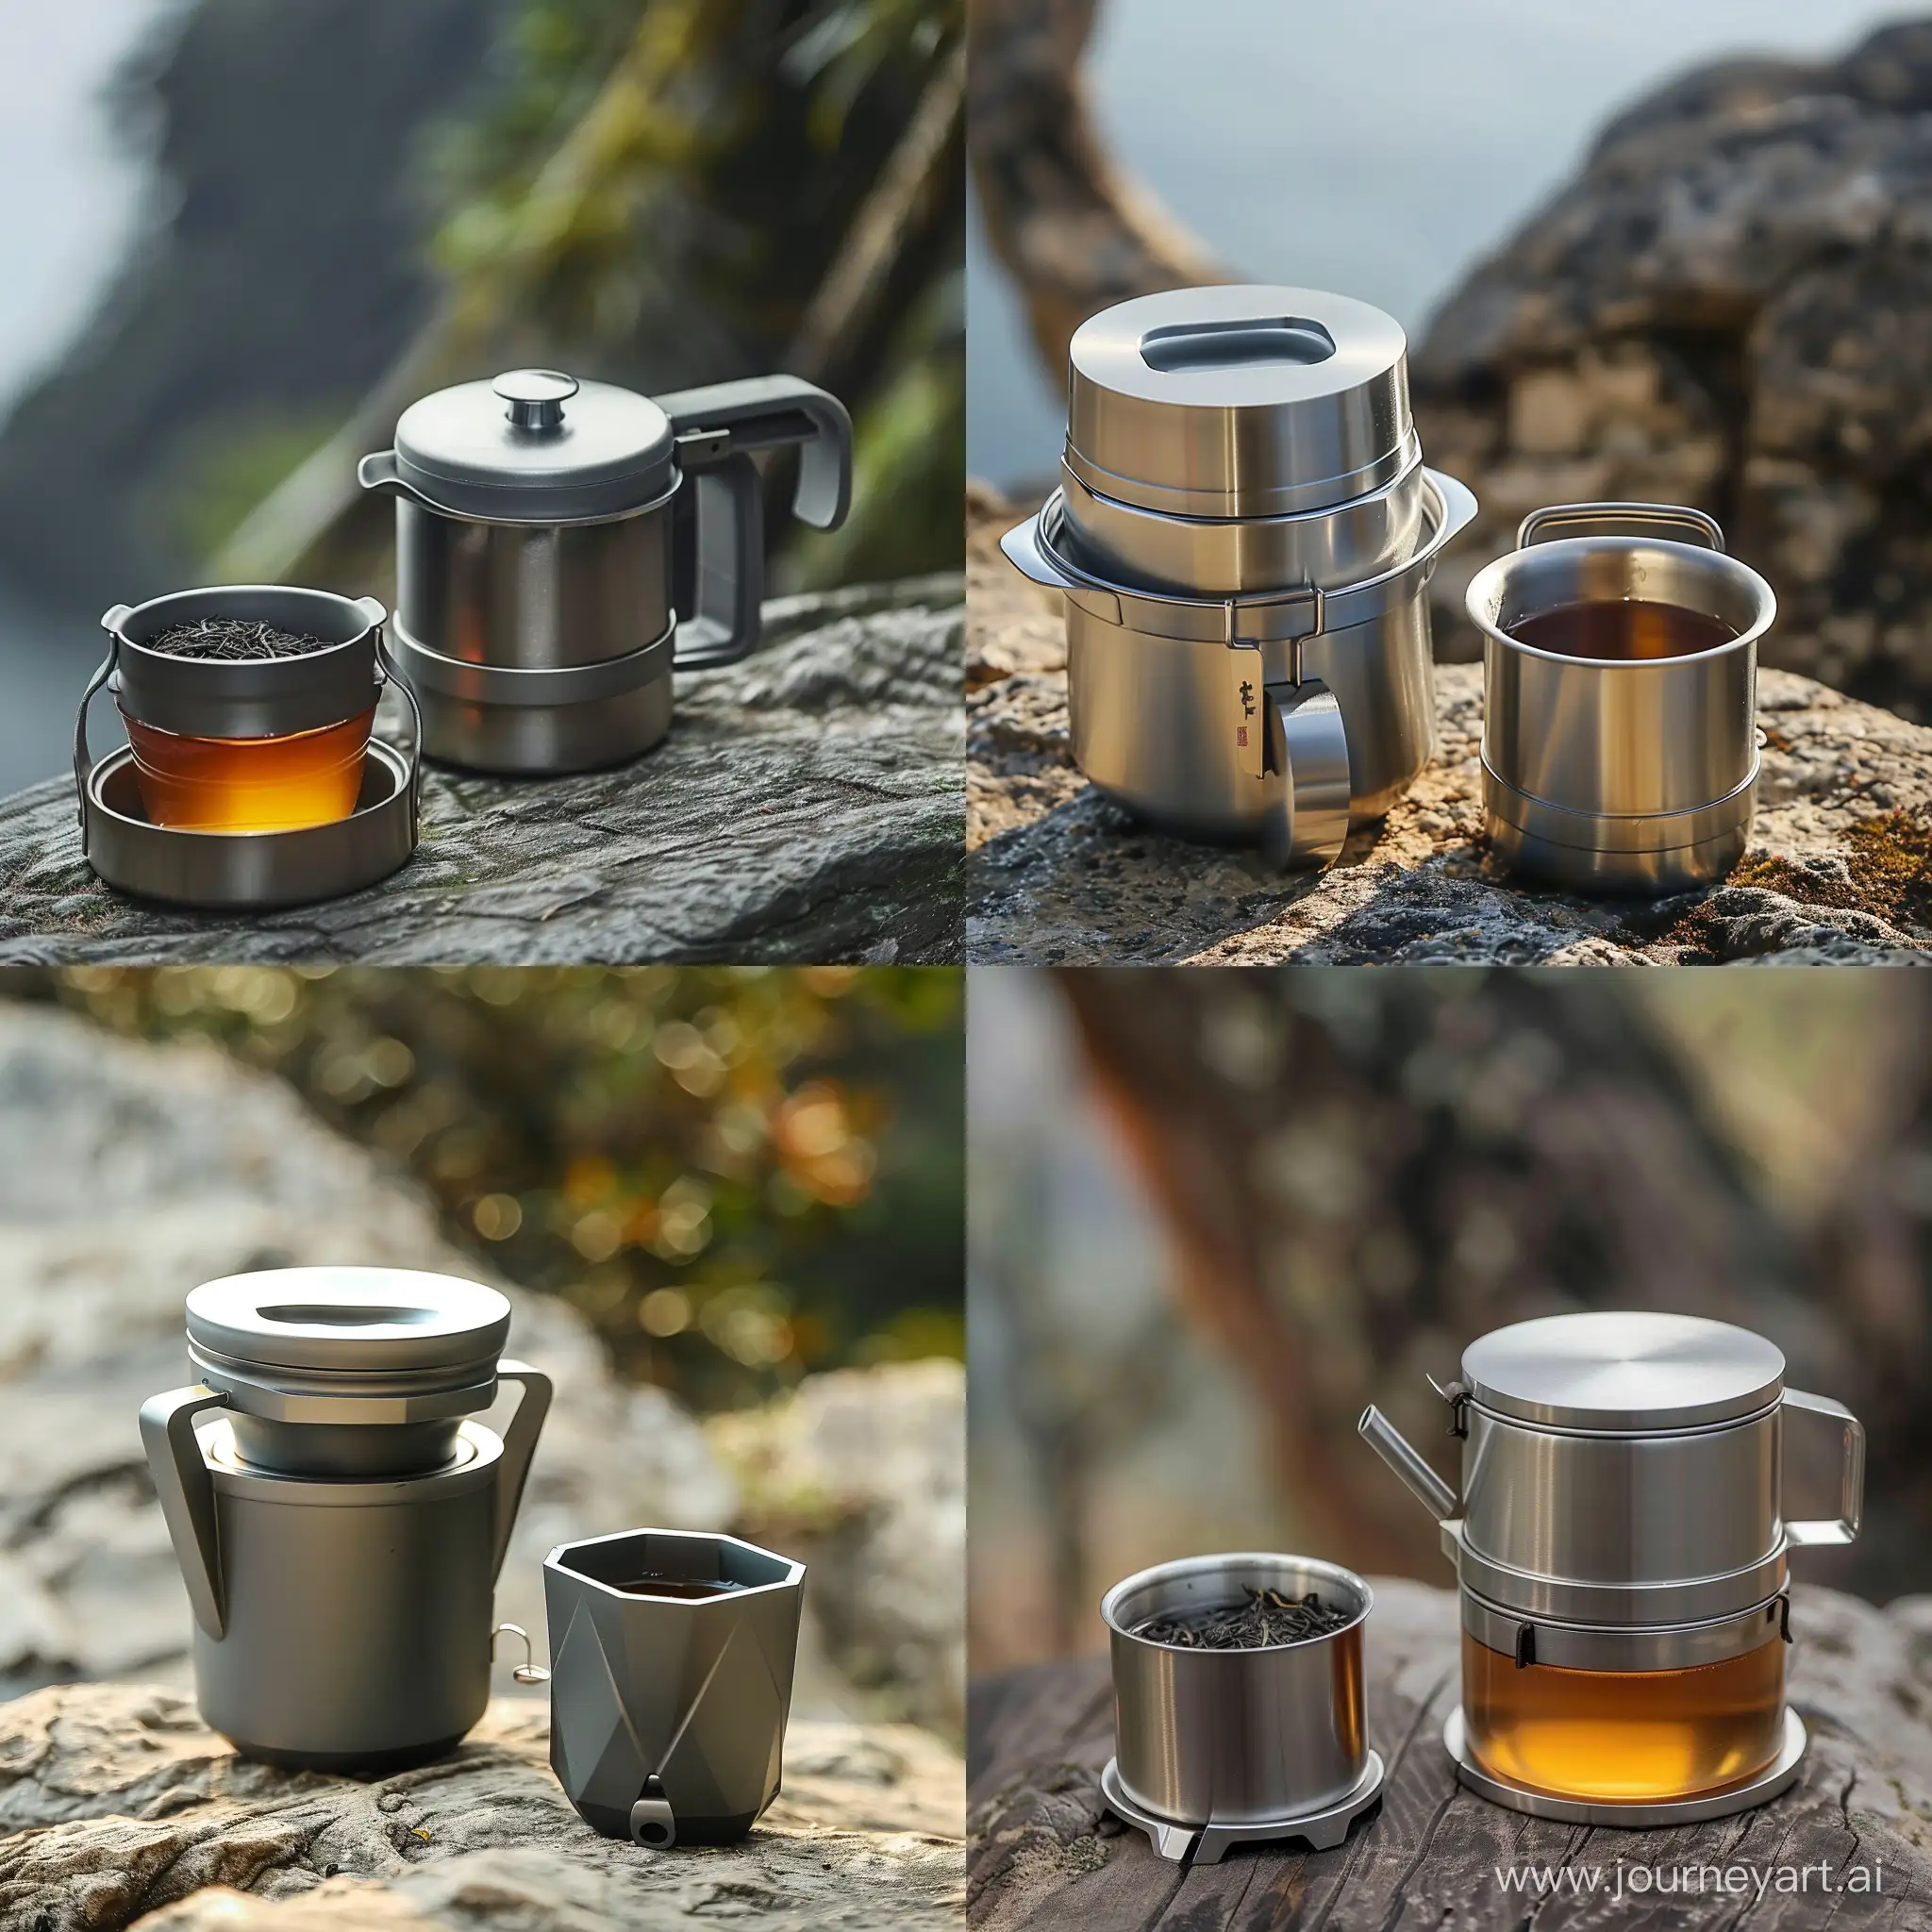 Design an outdoor portable tea set to cater to tea enthusiasts who enjoy outdoor activities. The tea set should be sleek and stylish, featuring a one-pot-one-cup design with a capacity of approximately 300 milliliters. The cup should be nestable within the pot and include a small compartment for storing disposable tea leaves. Utilize stainless steel for the pot body and PP material for the cup lid, incorporating collapsible handles for both the cup and pot. For aesthetic design, draw inspiration from the Taiwan black bear, implementing a minimalist or faceted style on the cup lid to exude a fashionable and upscale appearance.